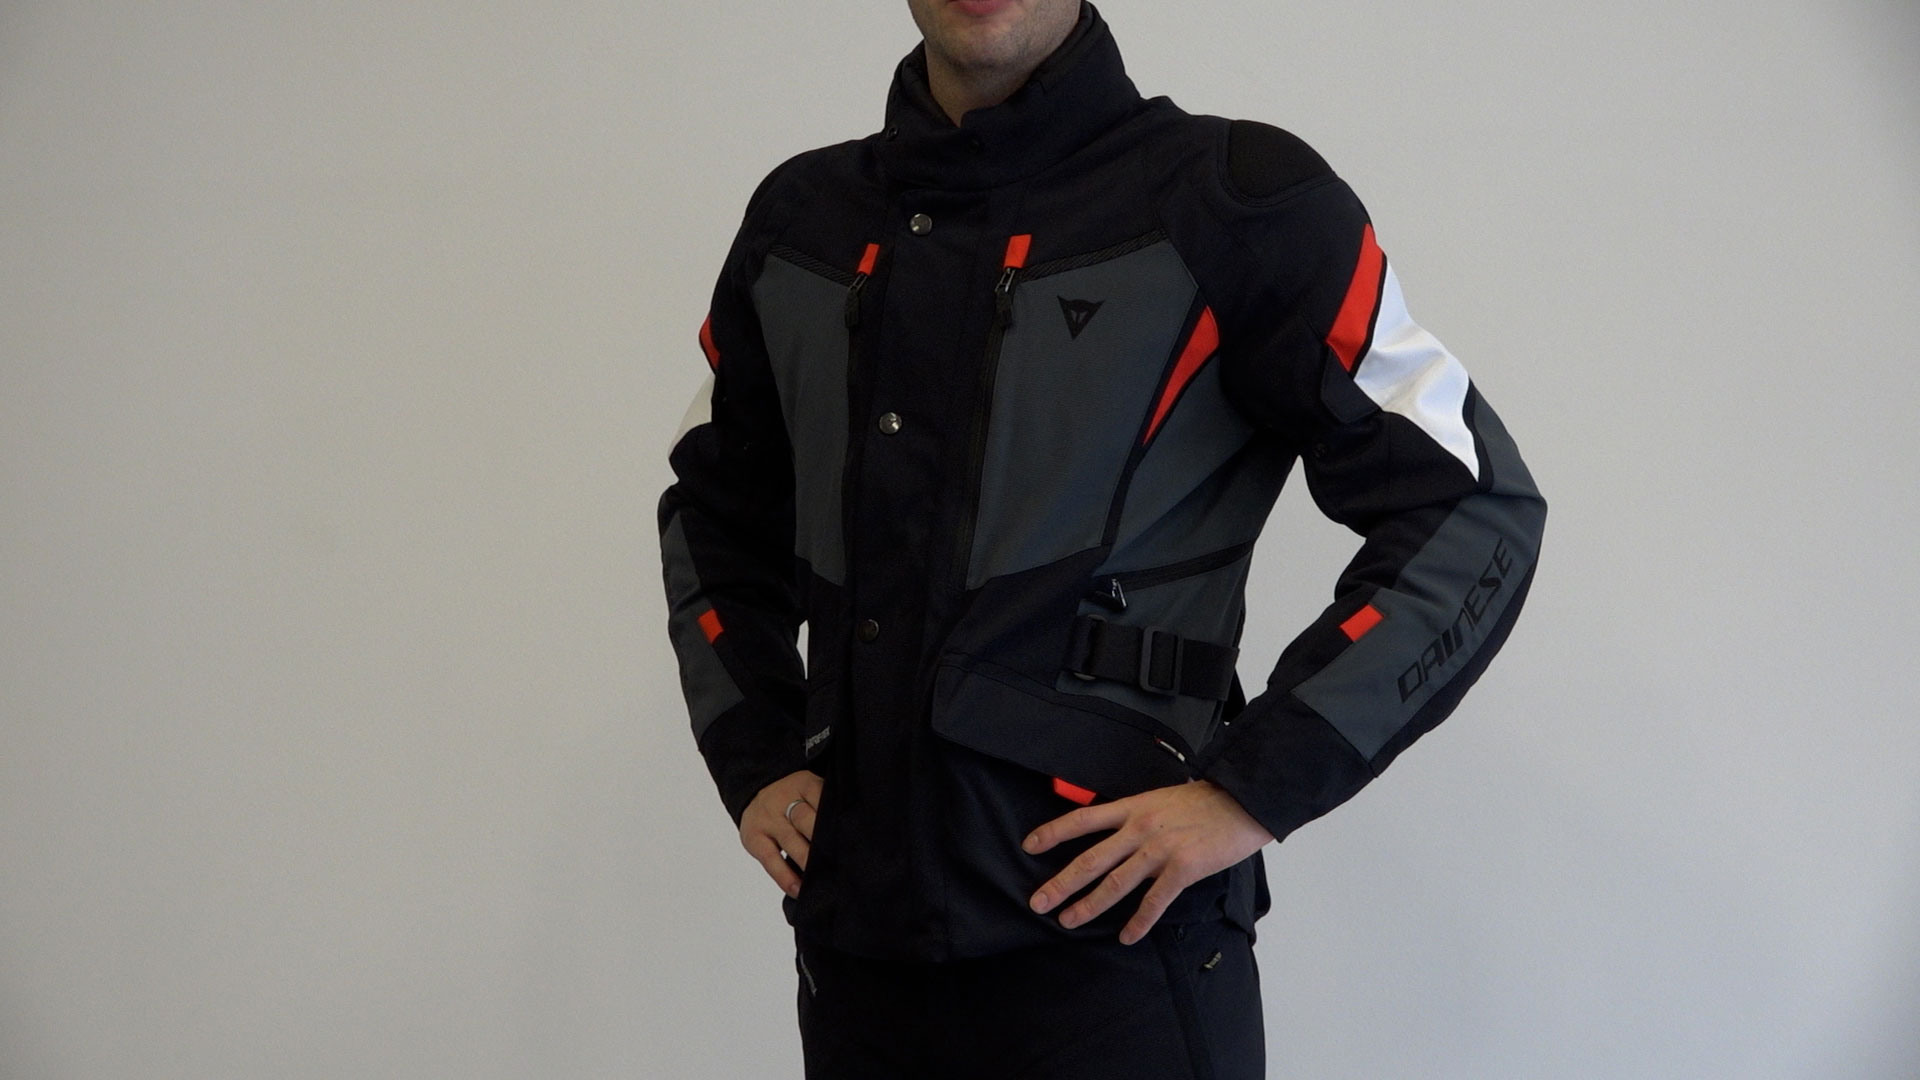 Dainese Carve Master 3 Gore-Tex jacket, one of the best touring